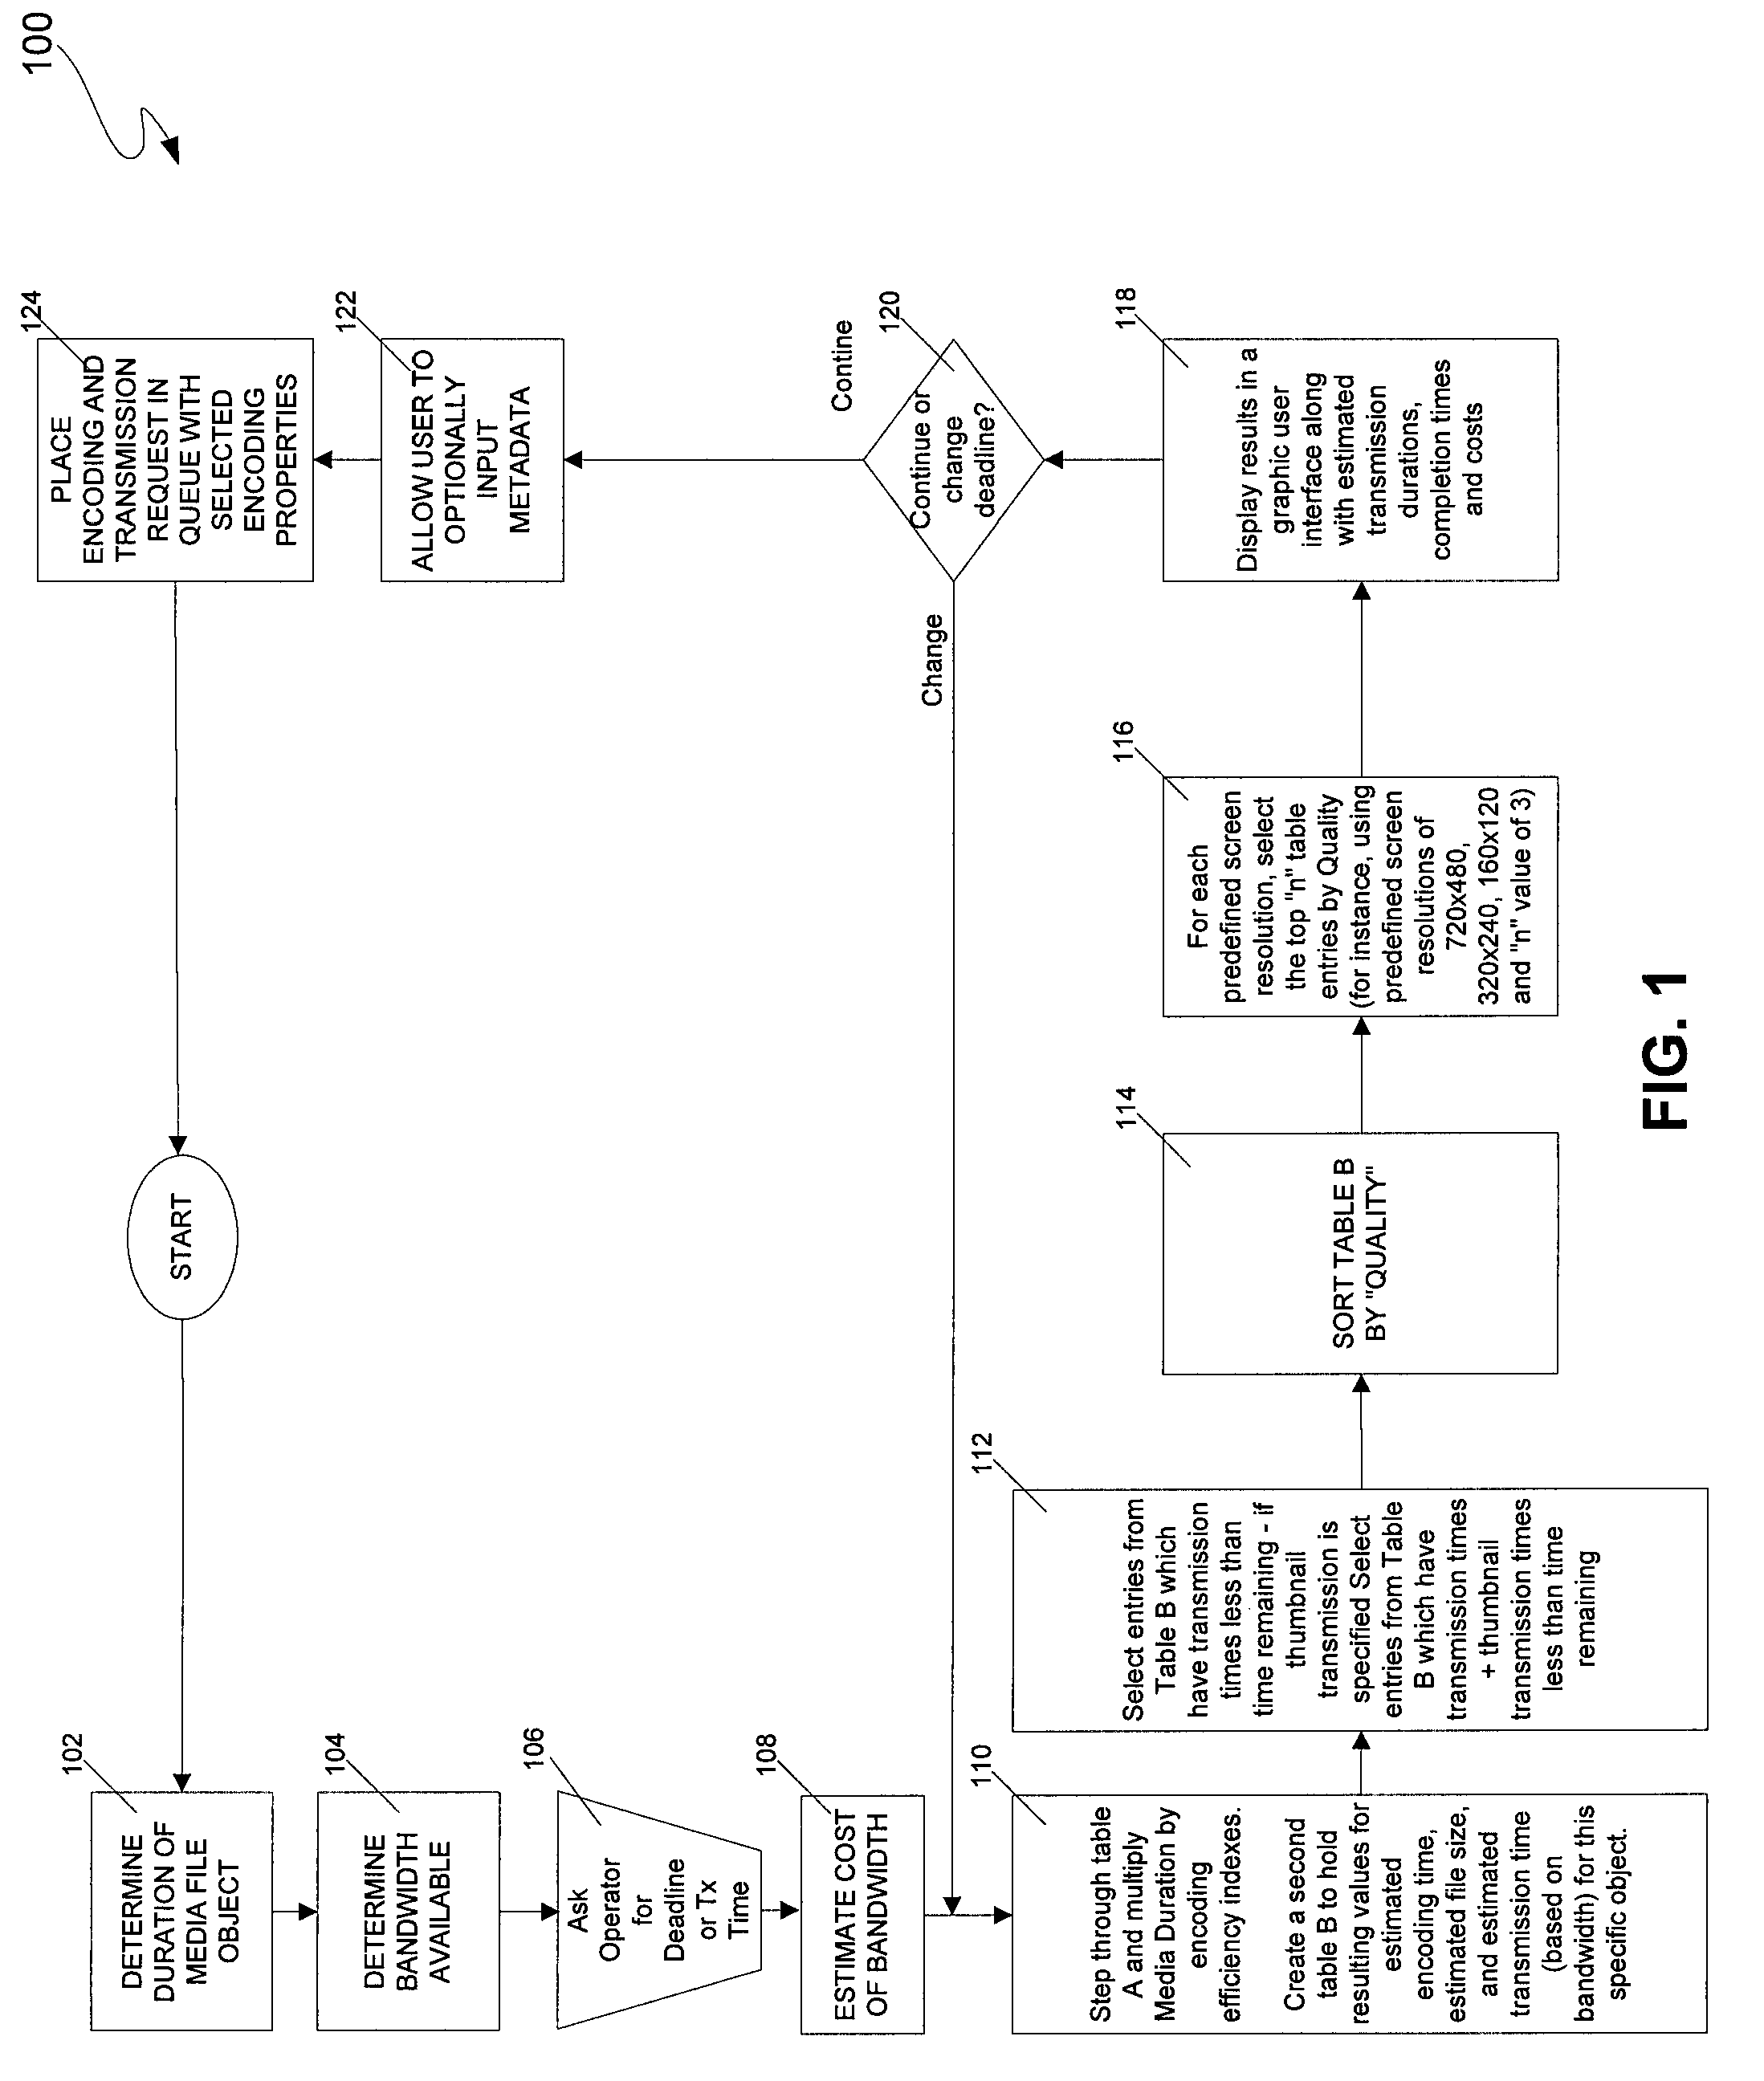 Automatic selection of encoding parameters for transmission of media objects